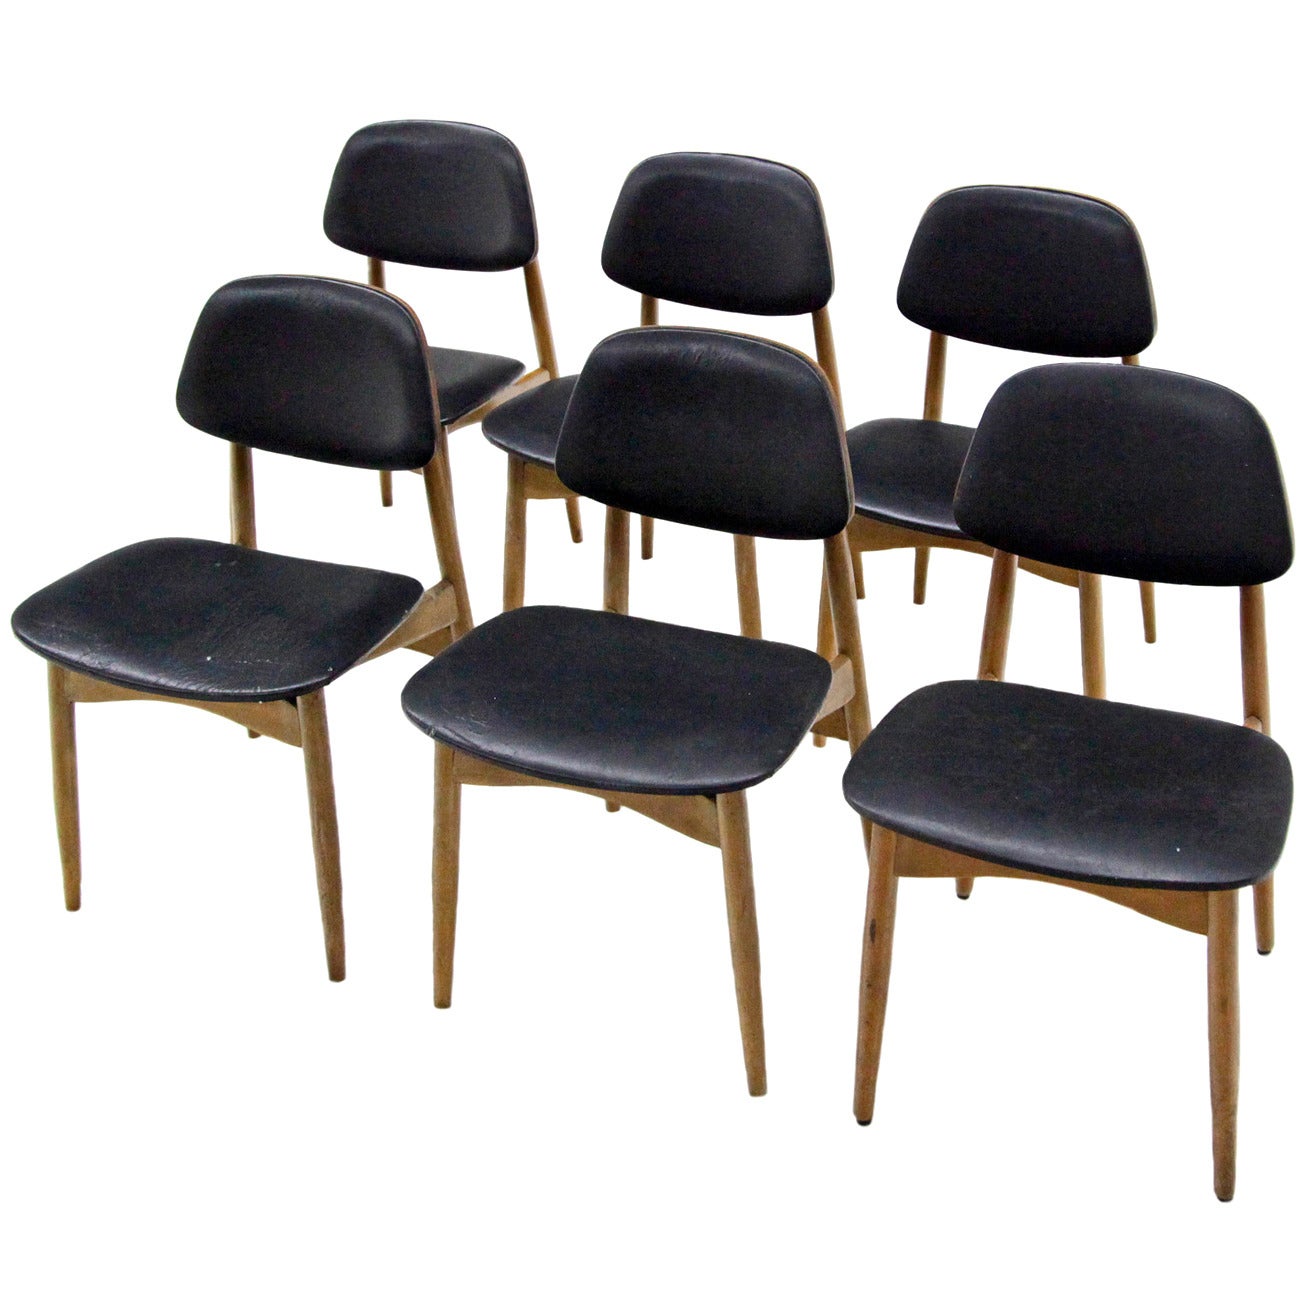 Set of Six Italian Leather Chairs from the 1970s